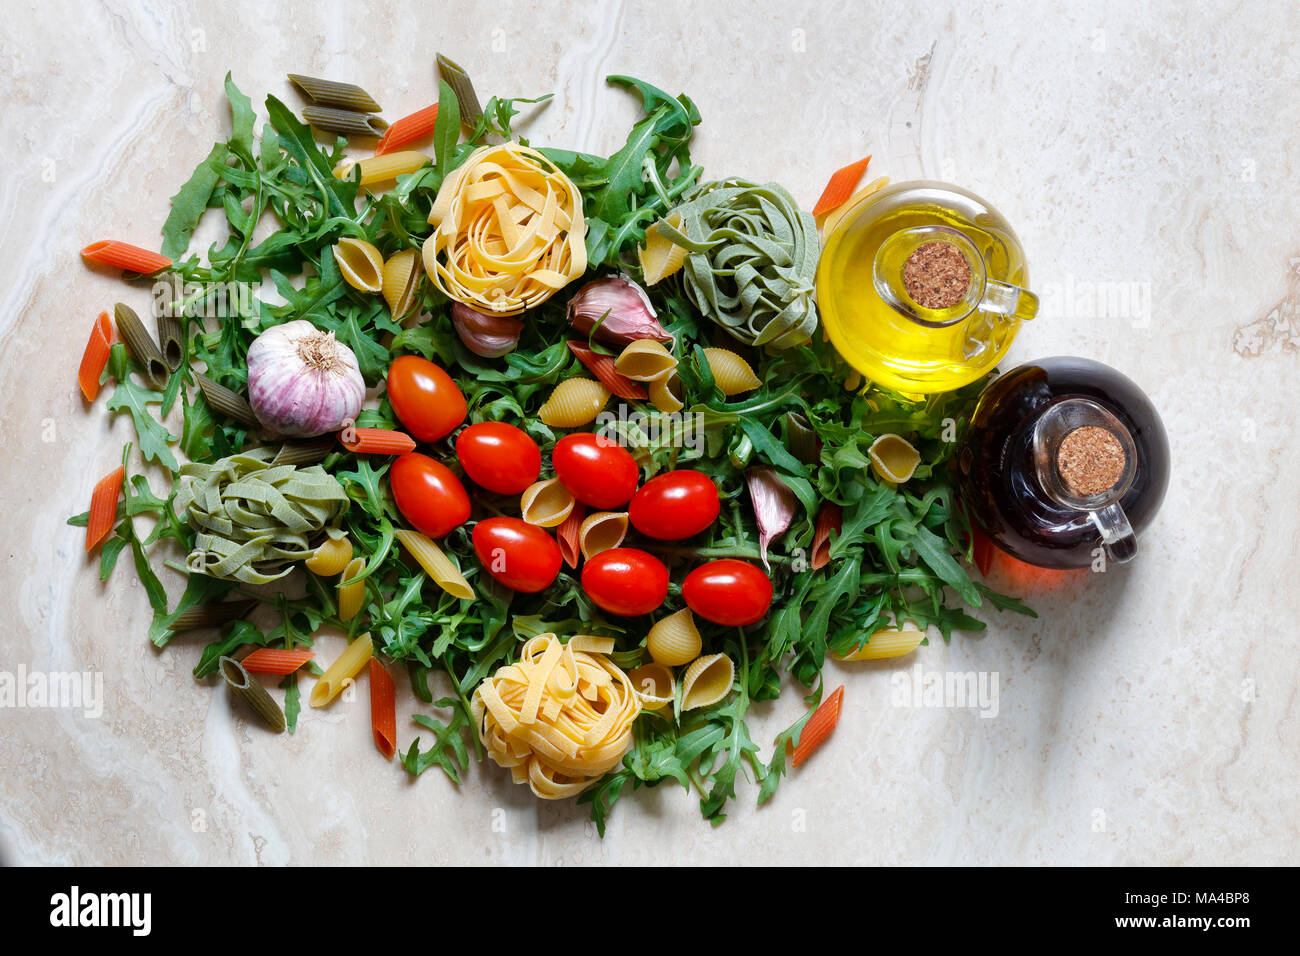 Rocket Arugula with plum tomatoes and garlic with Tagliatelle and penne pasta tricolore ingredients for Italian food on marble table with olive oil Stock Photo